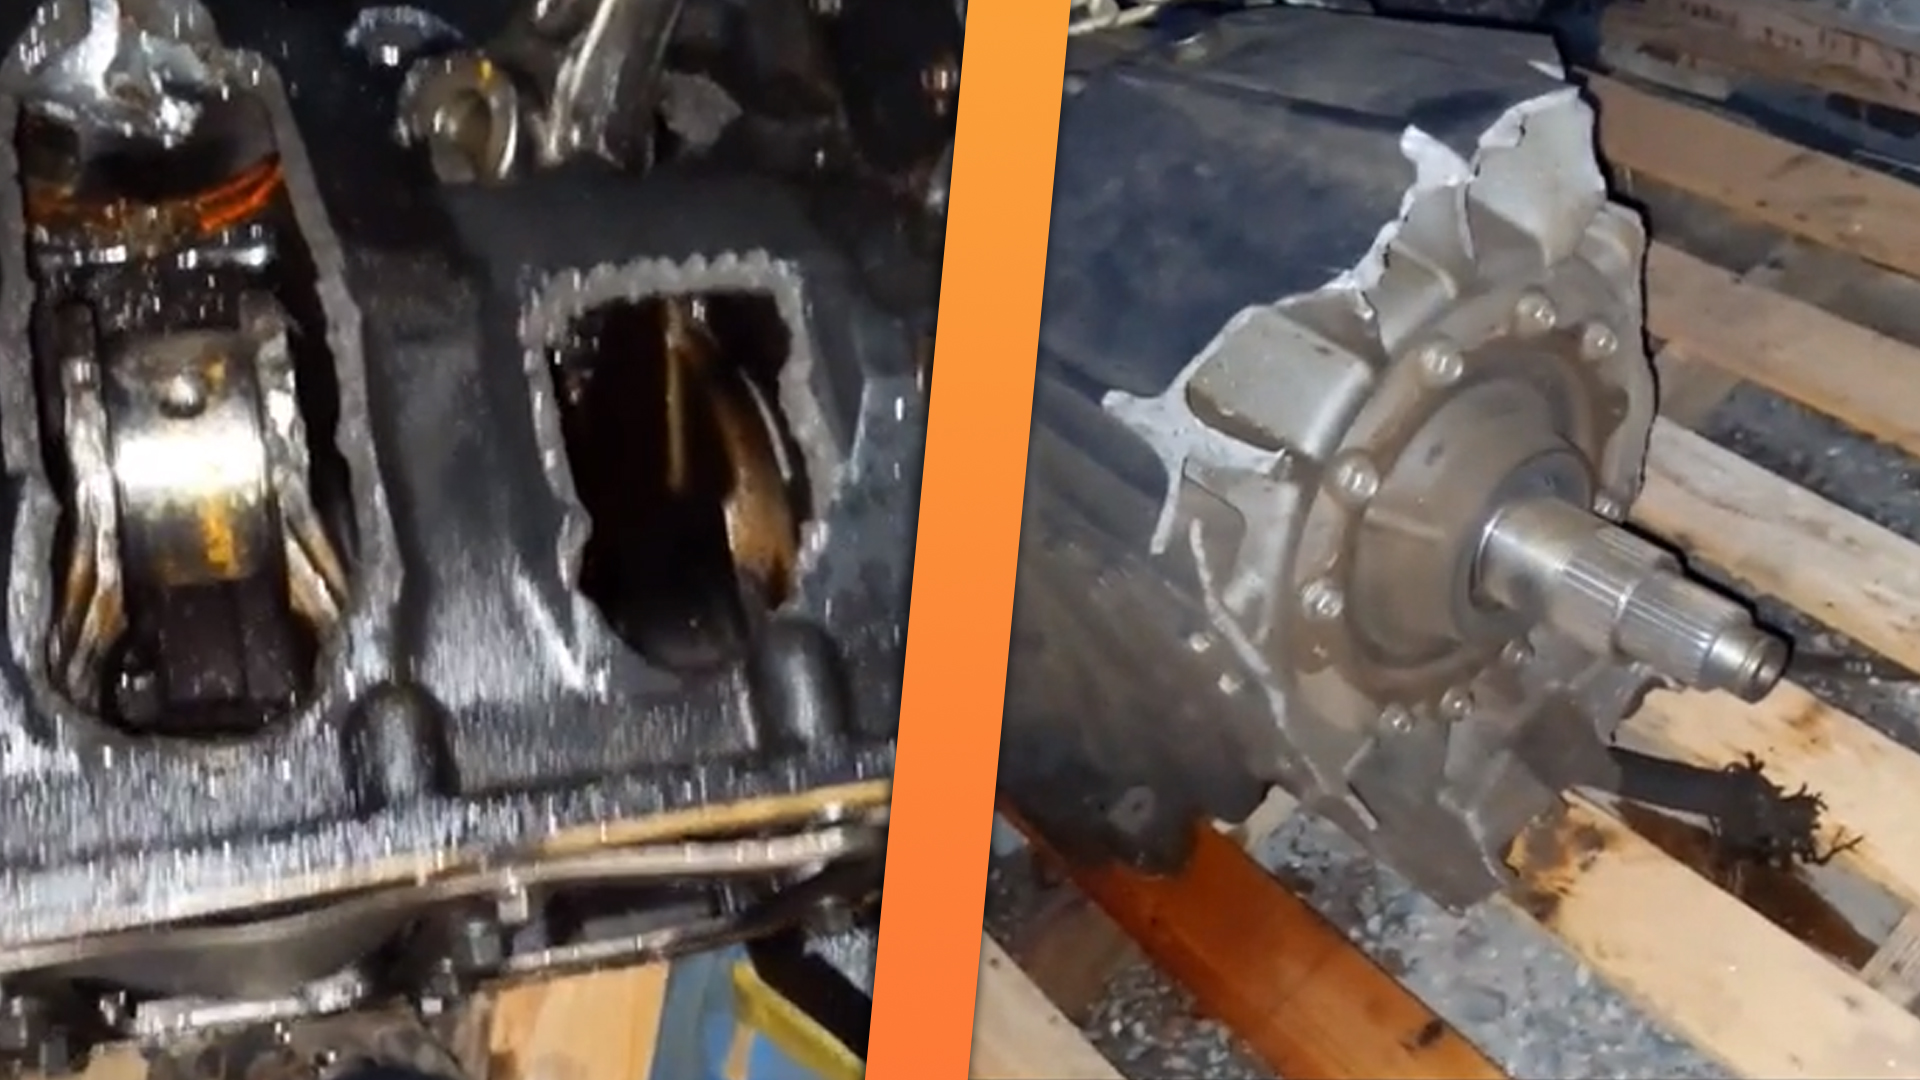 Over-Revved Truck Engine Sends Every Piston Through the Block, Obliterates Transmission